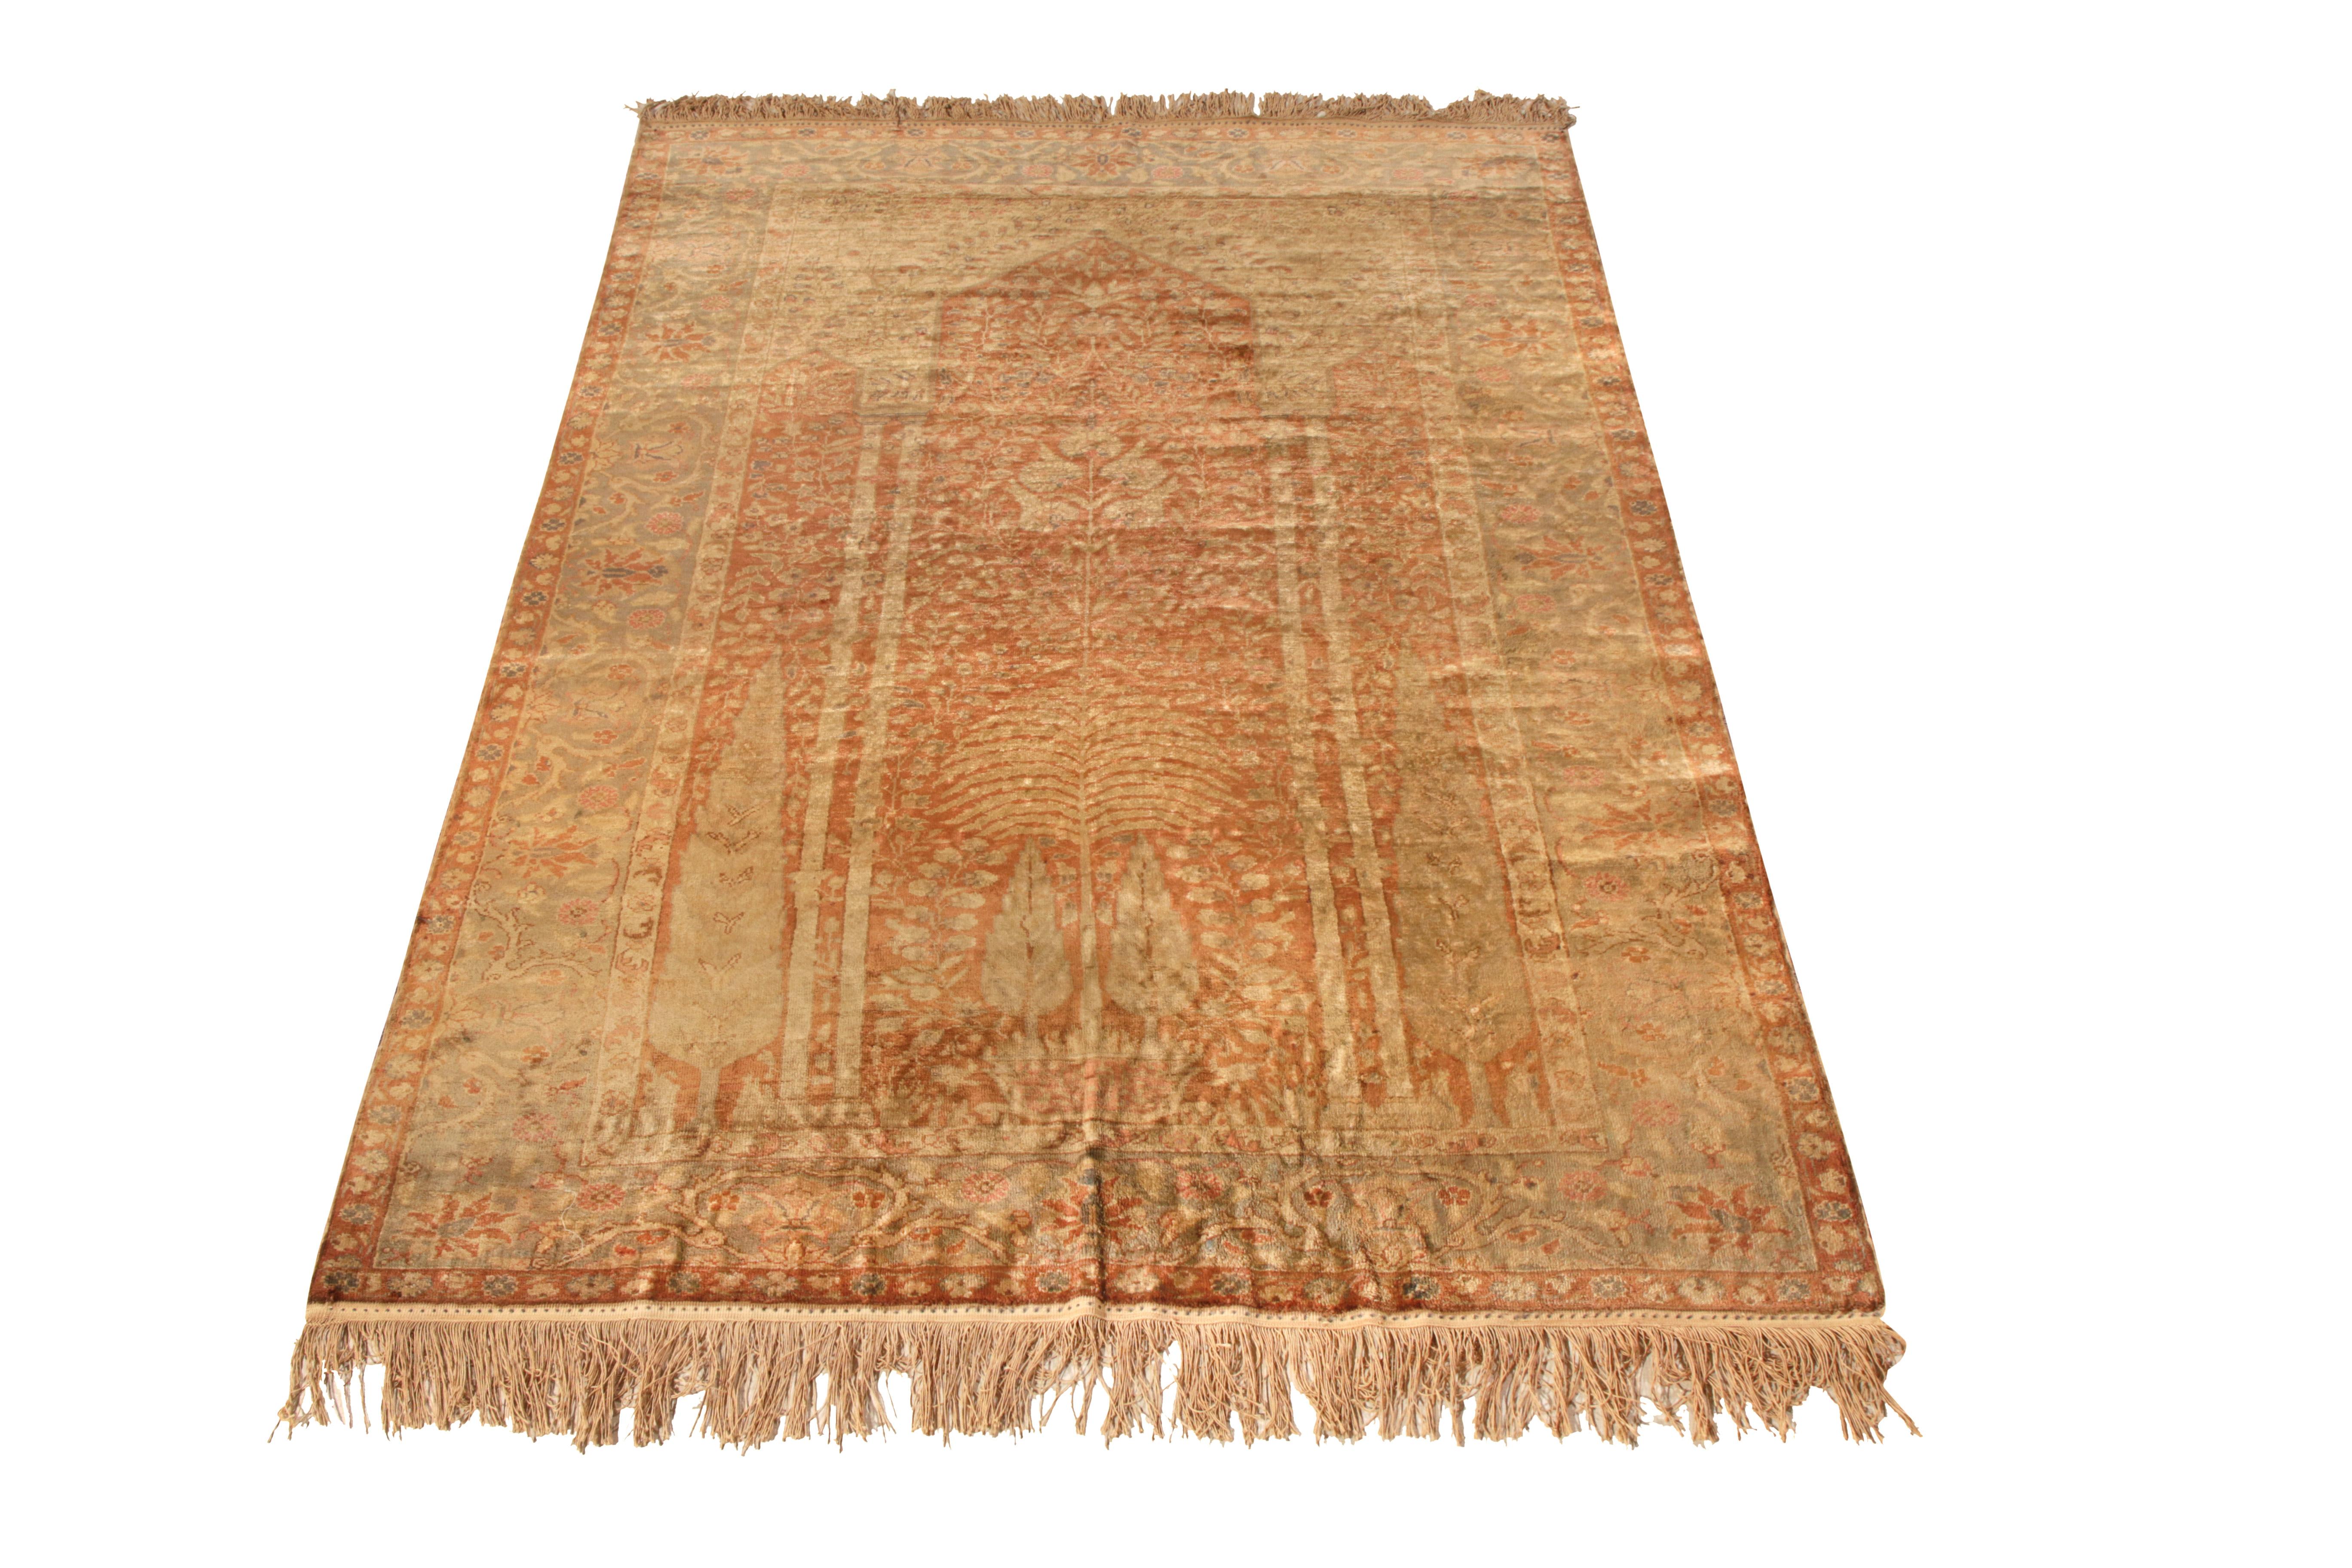 A 4x6 antique Kayseri rug joining Rug & Kilim’s coveted Antique & Vintage Collection. Hand knotted in wool, the rug is a classic drawing that enjoys a regal floral medallion pattern reflecting the artistic vision of the Turkish workshop circa